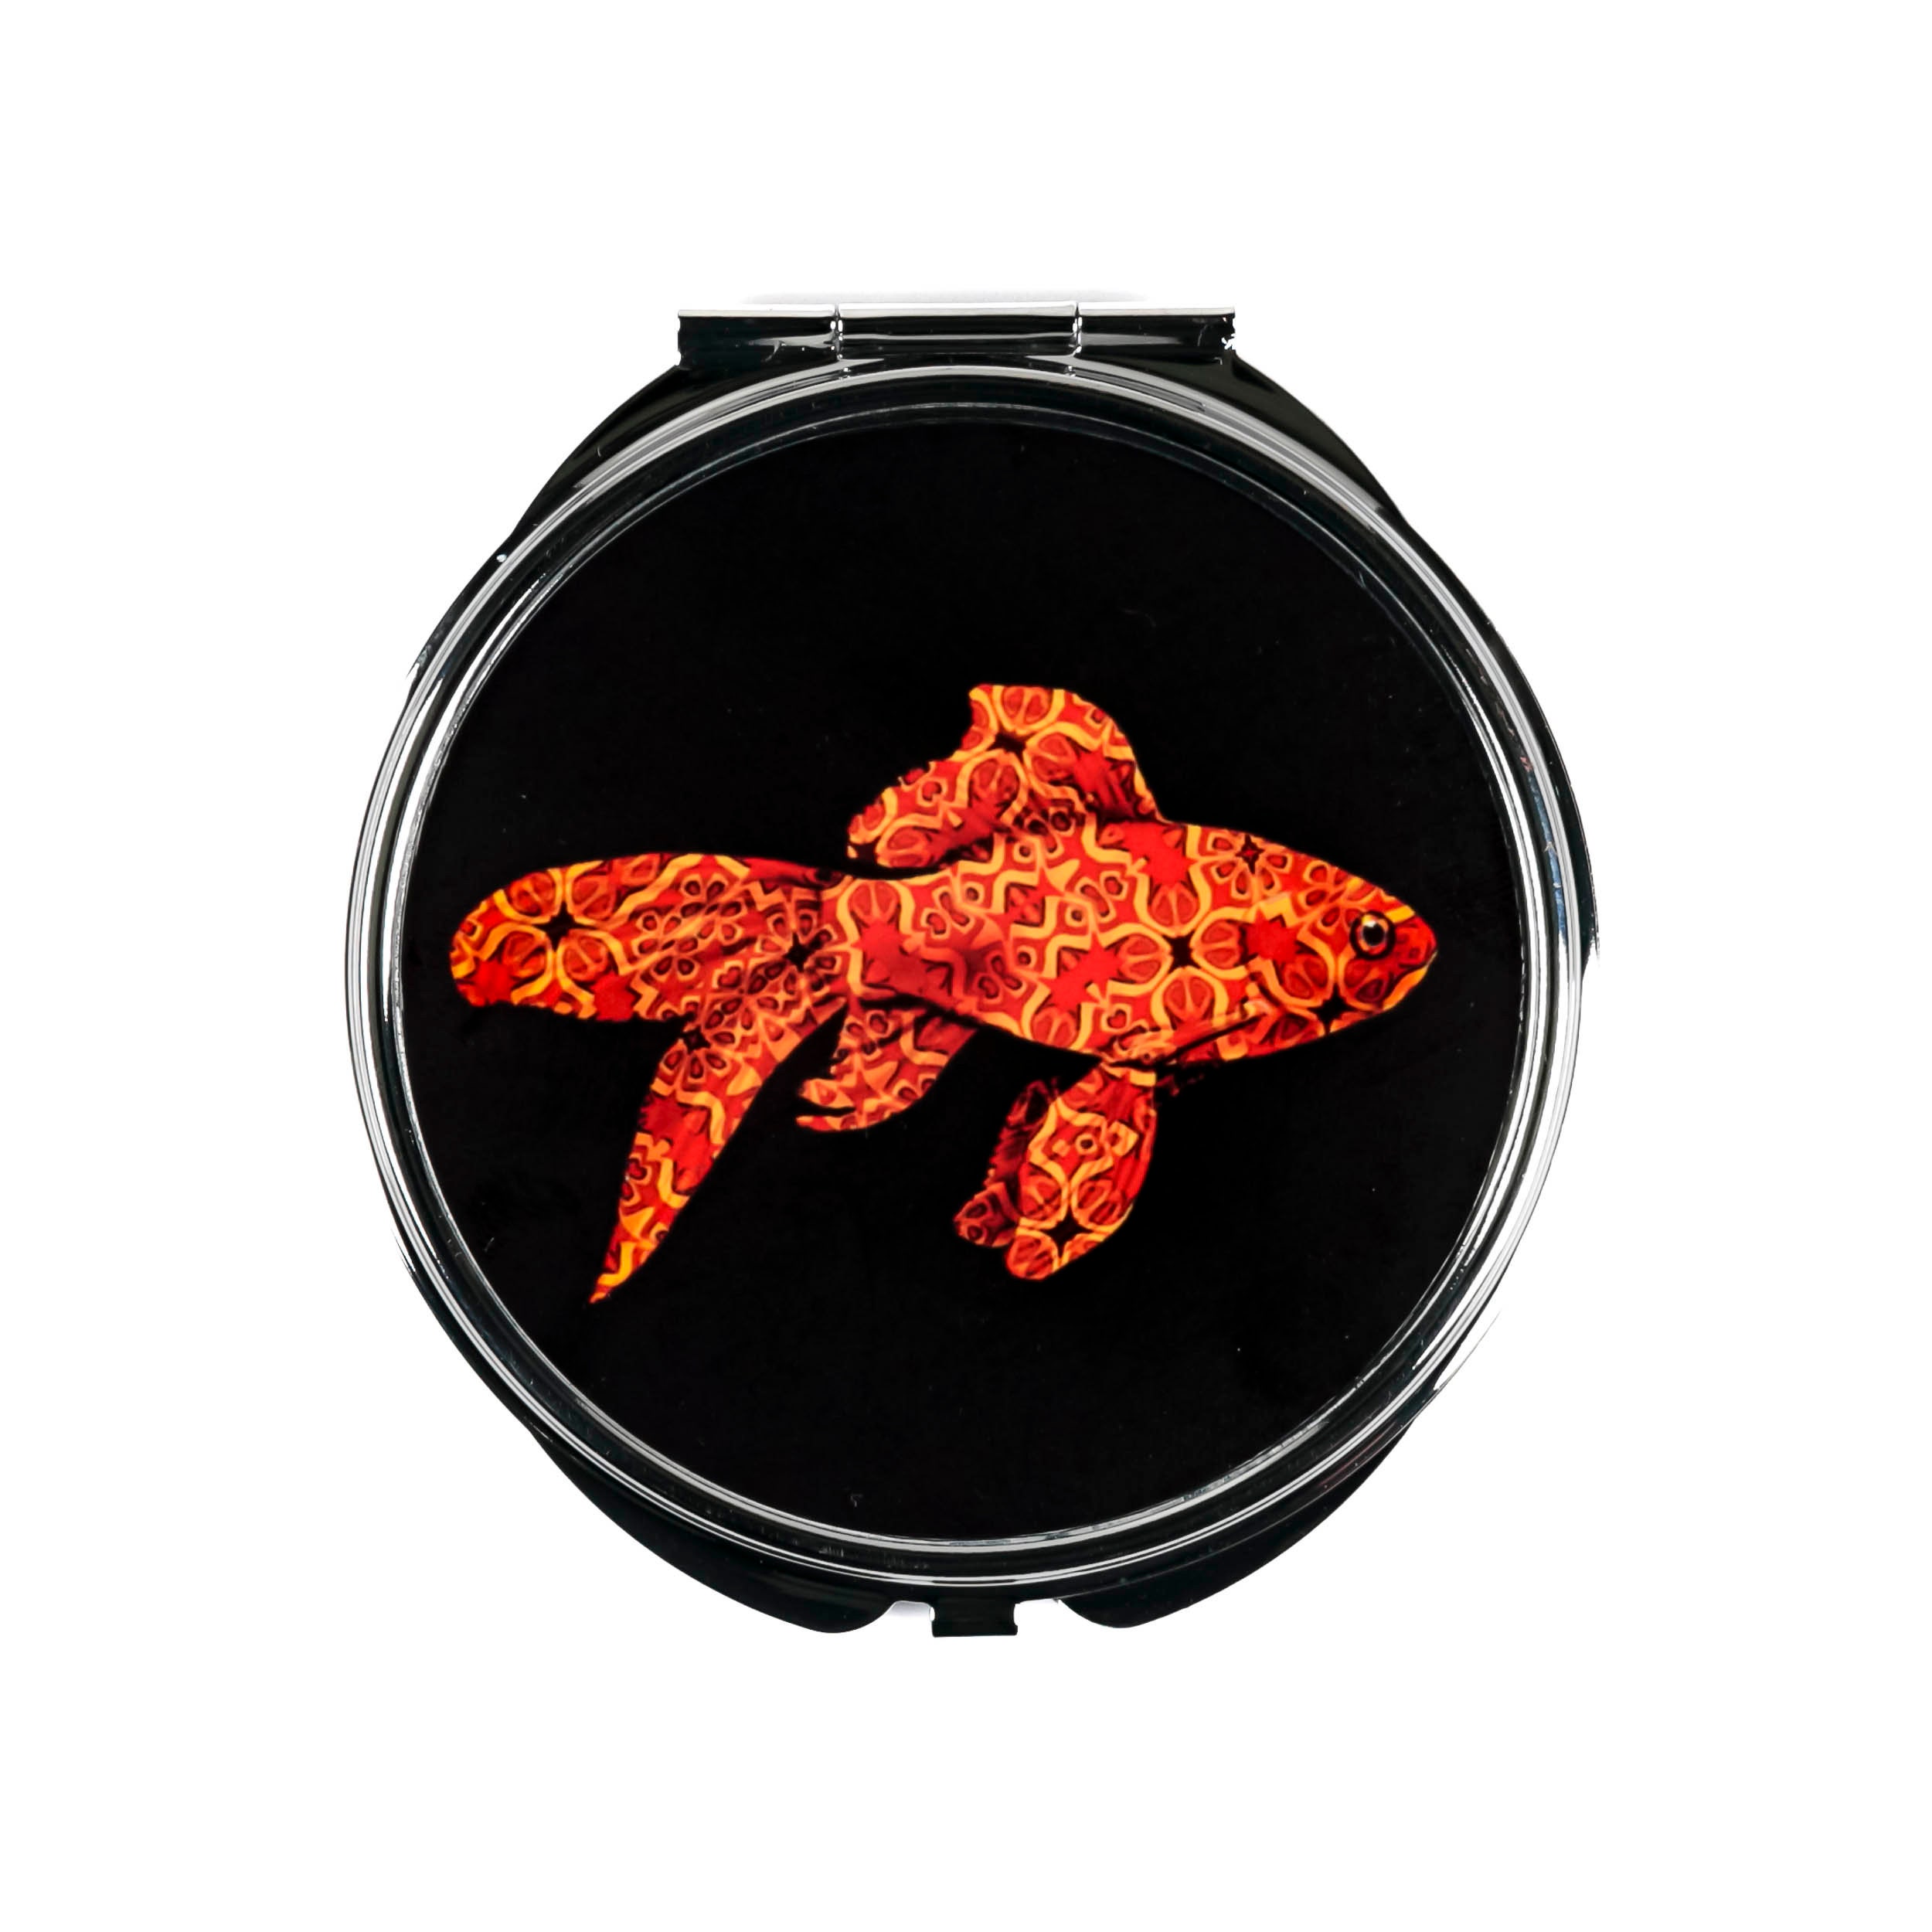 Red Gold Fish Compact Mirror - Small Makeup Portable Vanity Folding Hand Lover Gift & Lens Cloth